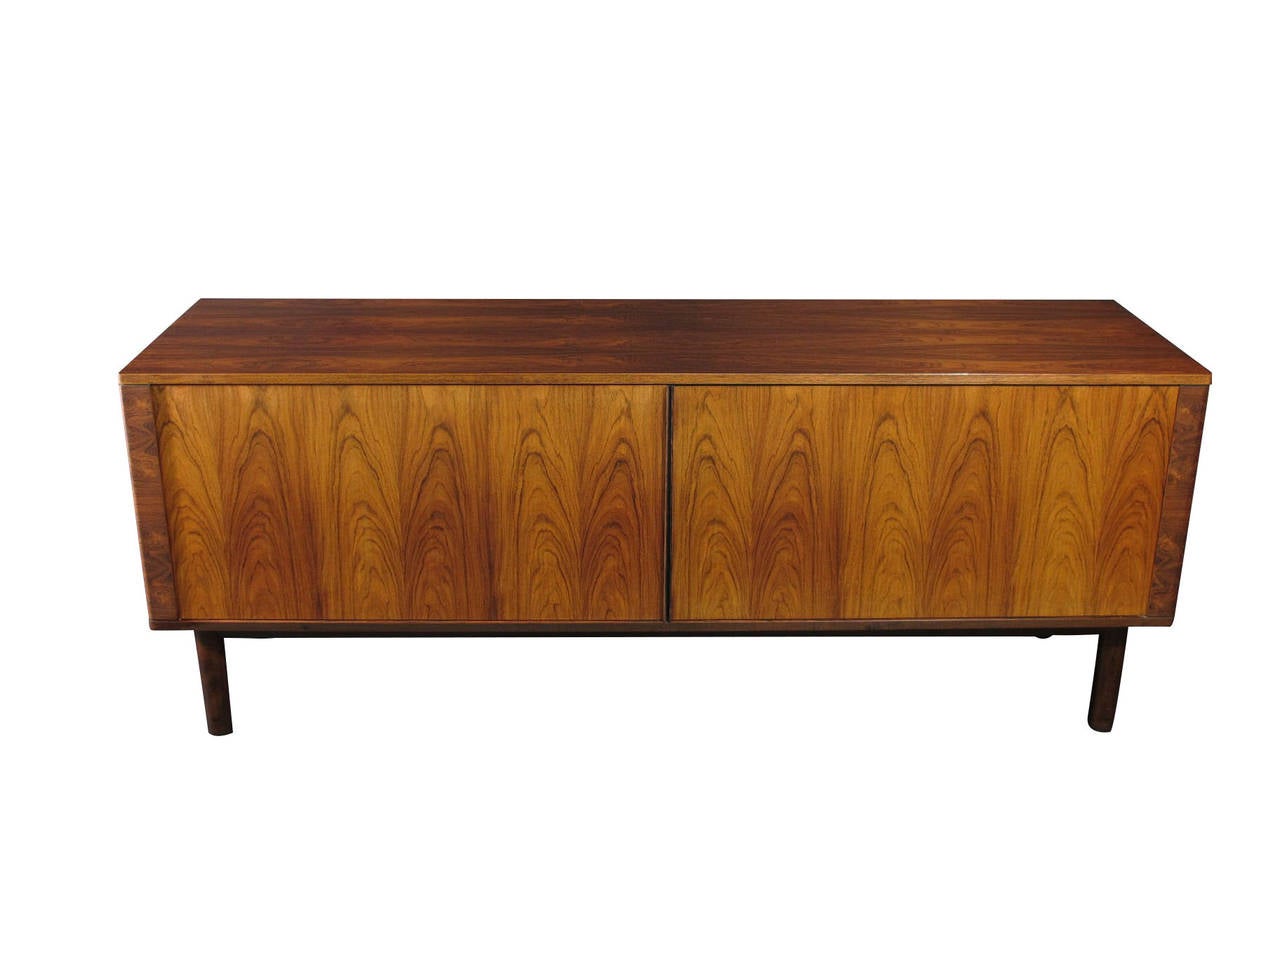 Mid-Century rosewood credenza by Hornslet Mobelfabrik; finely crafted with bookmatched grain and seamless tambour doors reveal and interior of white oak with adjustable shelves and drawers in center. The rosewood is in horizontal pattern on sides